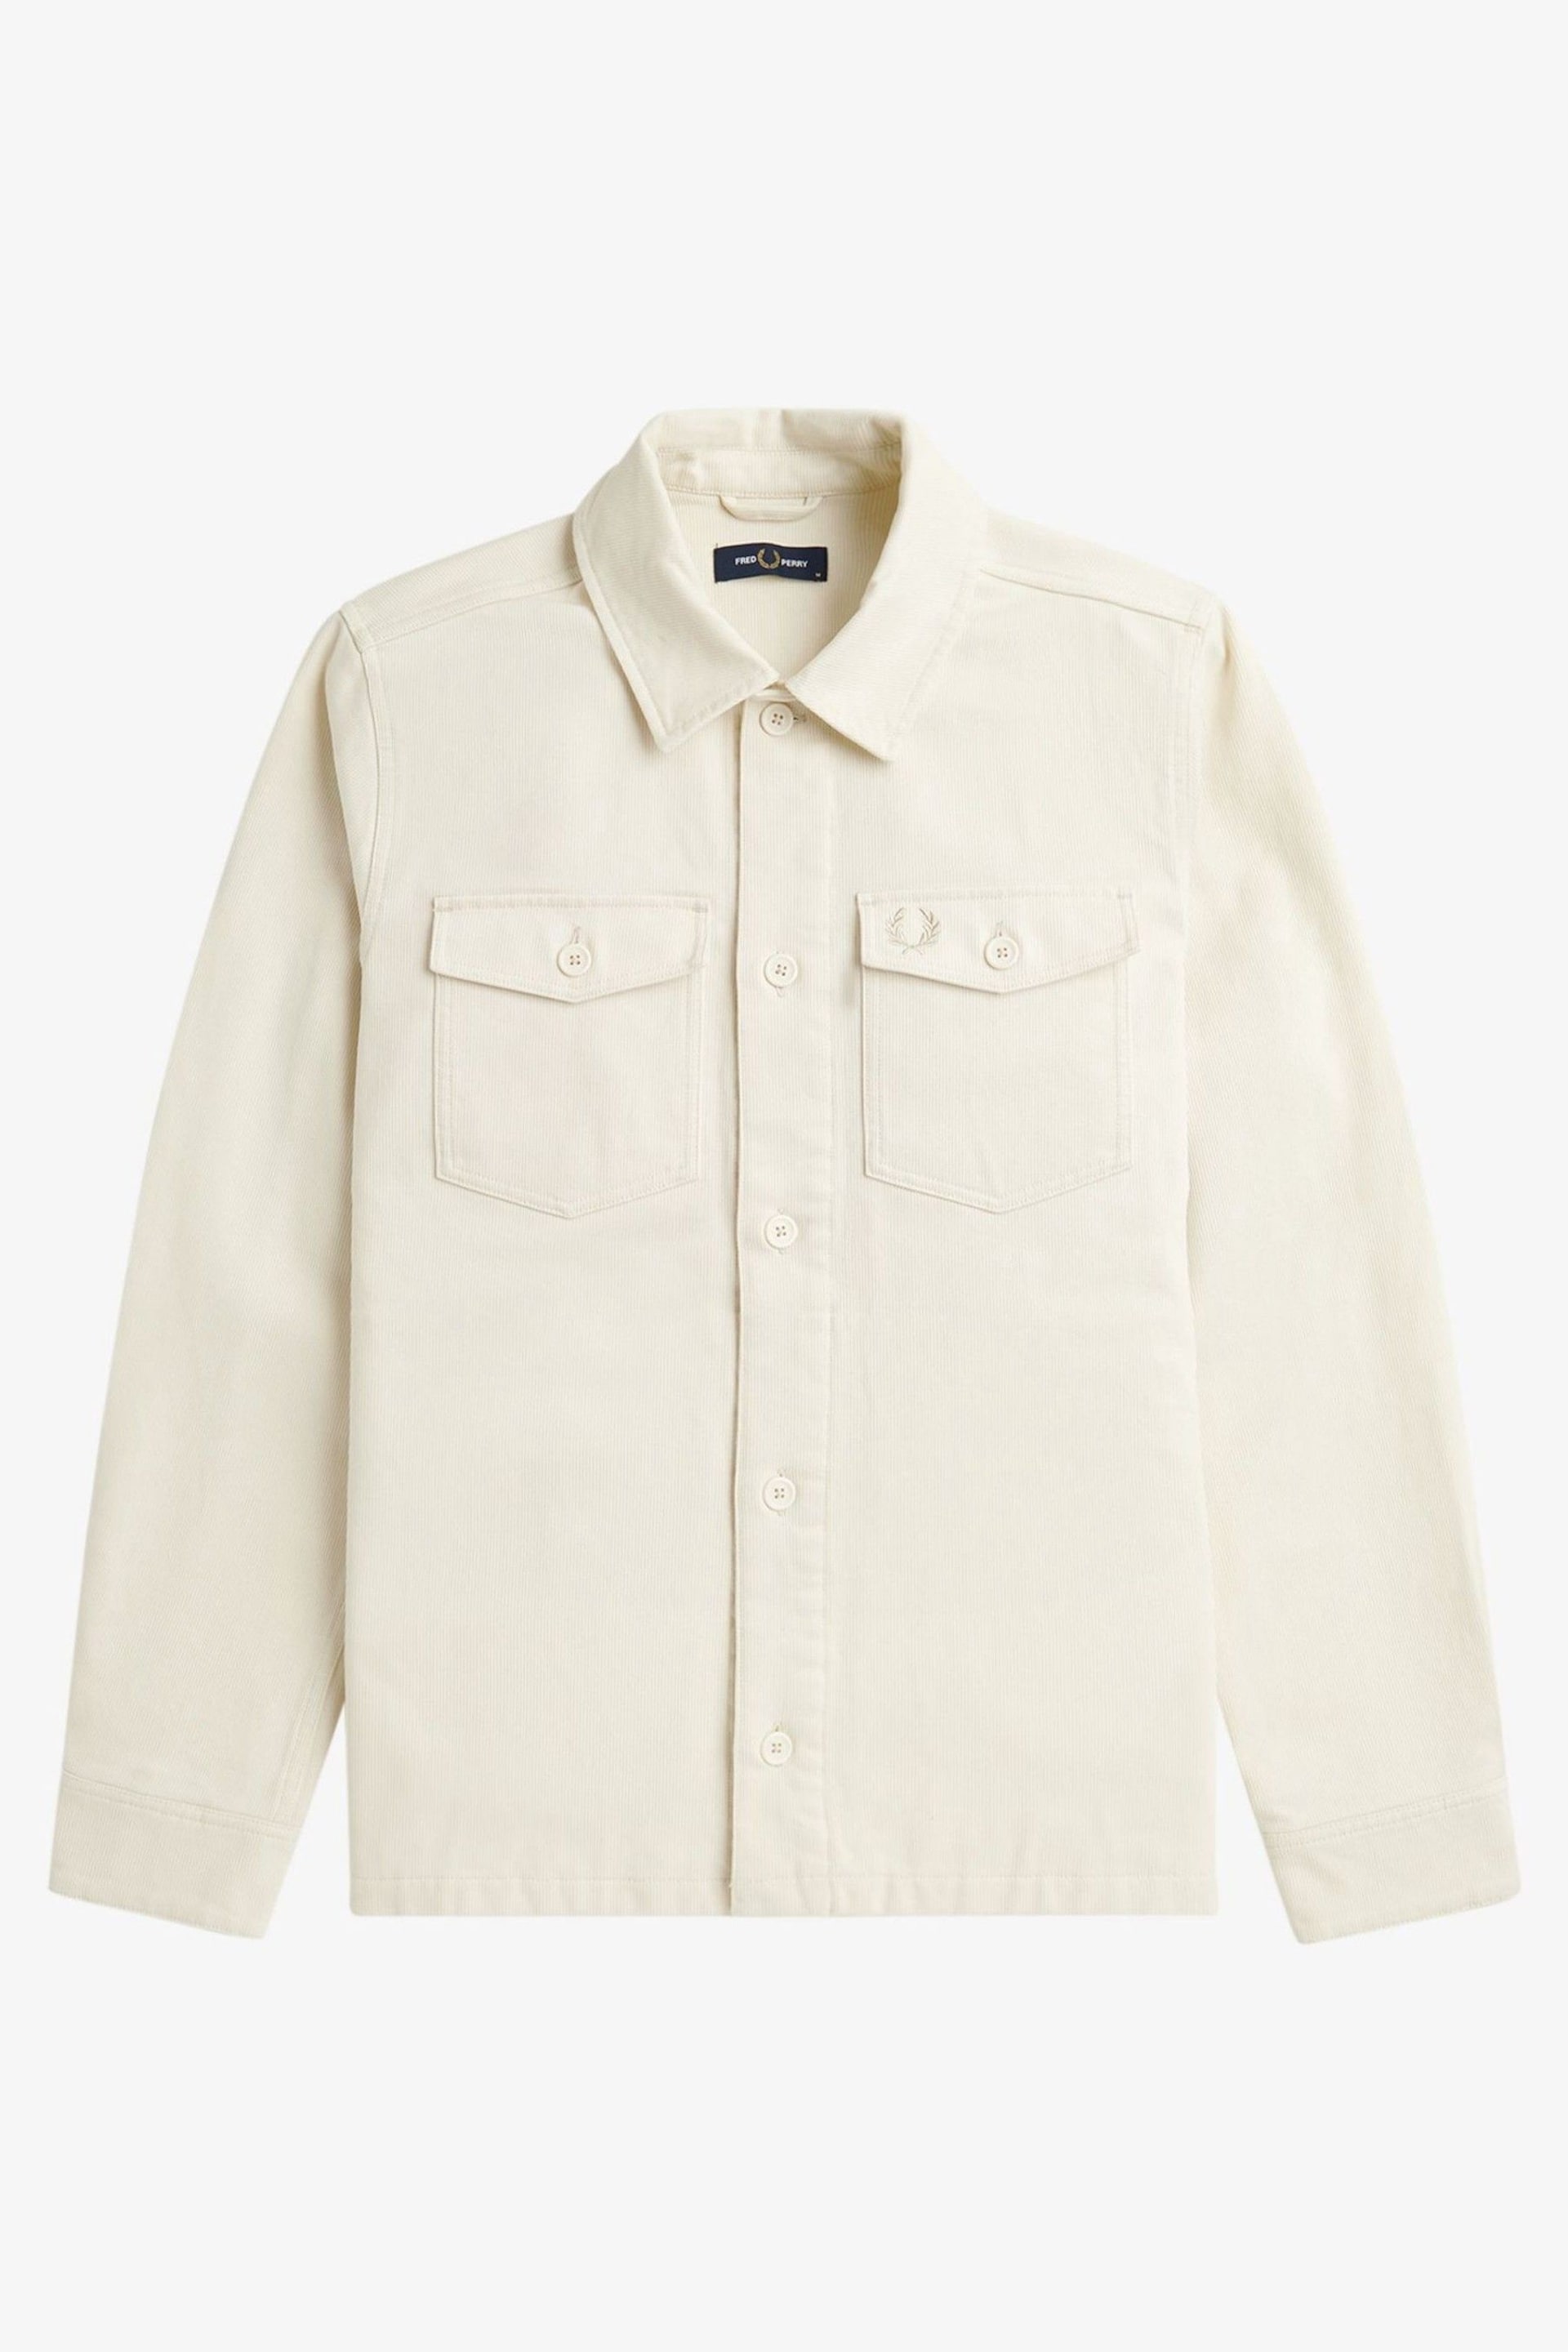 Fred Perry Ecru White Bedford Cord Overshirt - Image 5 of 6